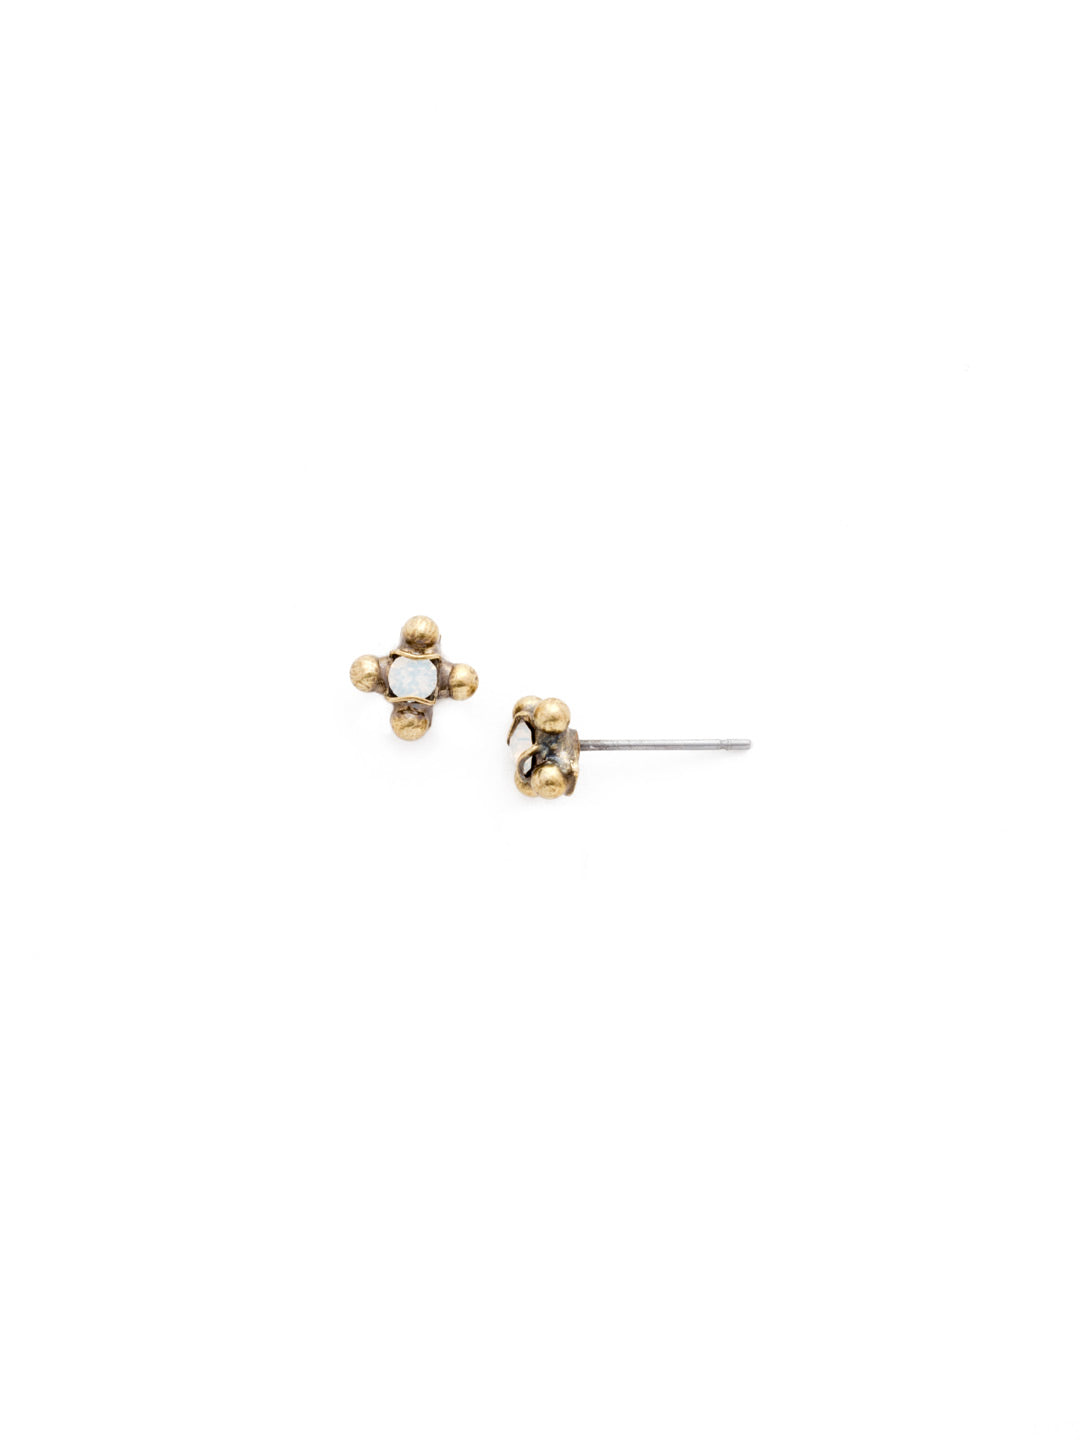 Holiday 2016 One-of-a-Kind Earring Stud Earrings - EDH2AGPLU - This one-of-a-kind style is available for a limited time only! From Sorrelli's Pearl Luster collection in our Antique Gold-tone finish.